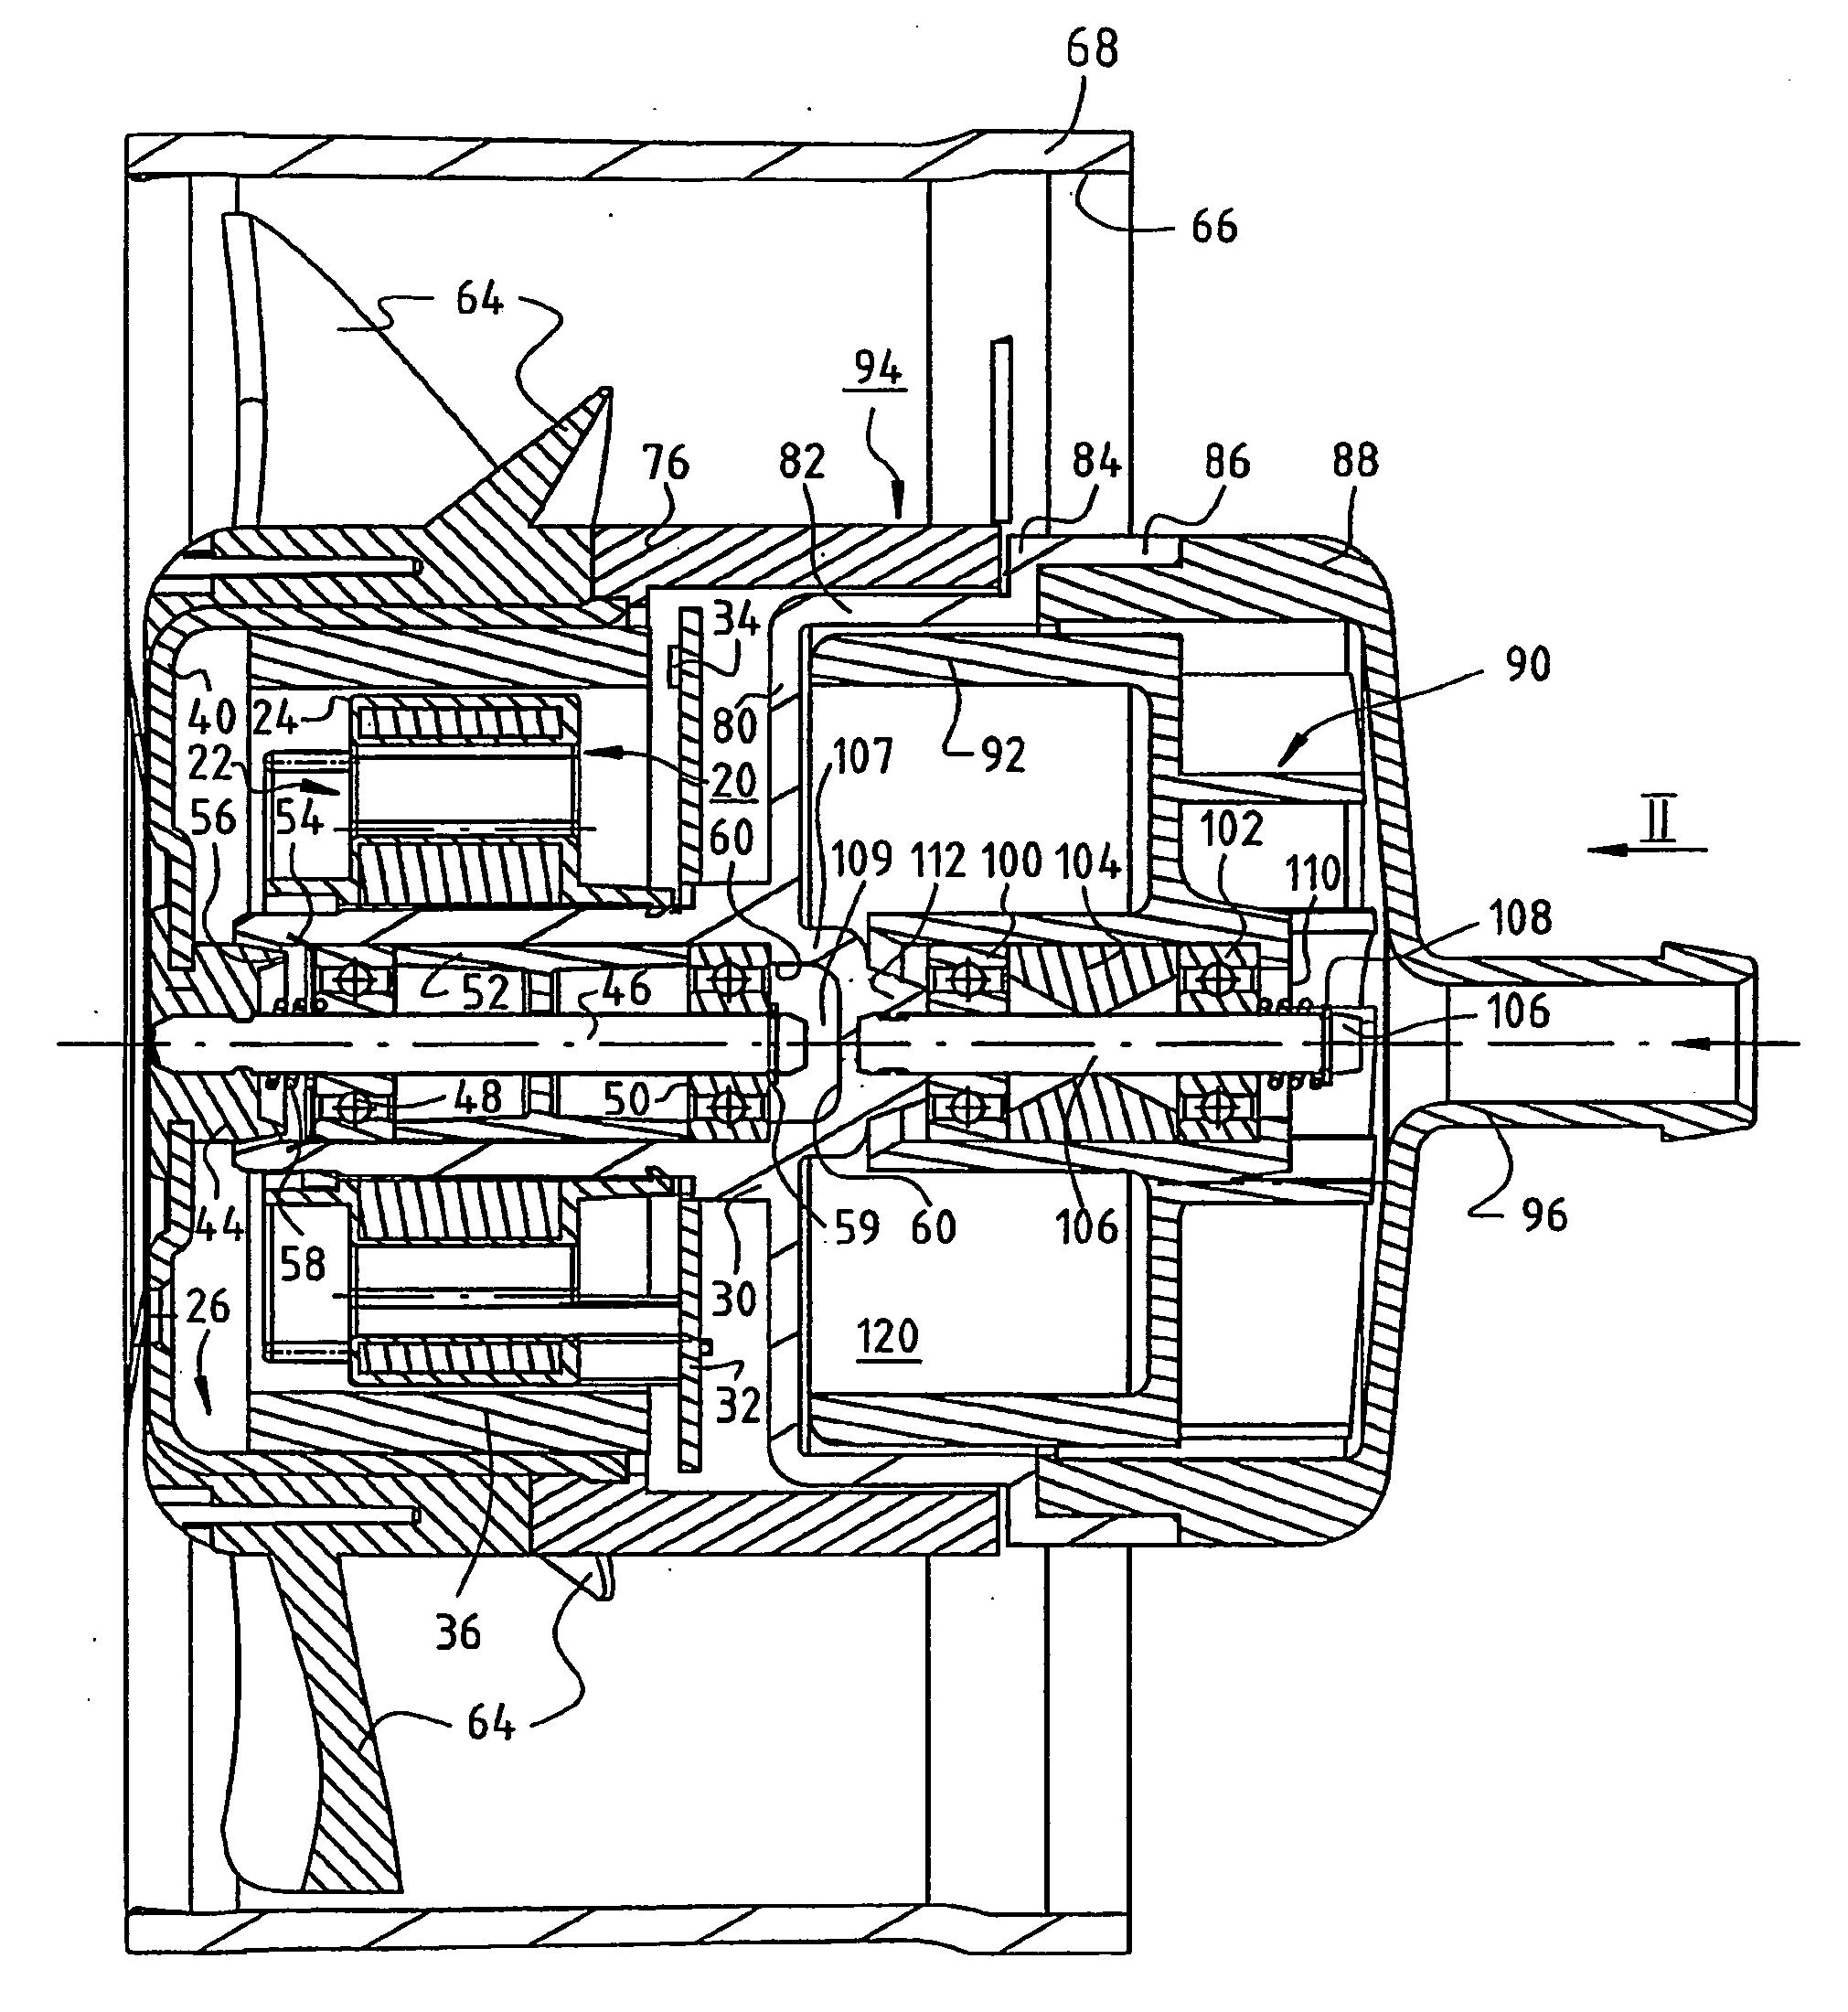 Arrangement with an electronically commutated external rotor motor